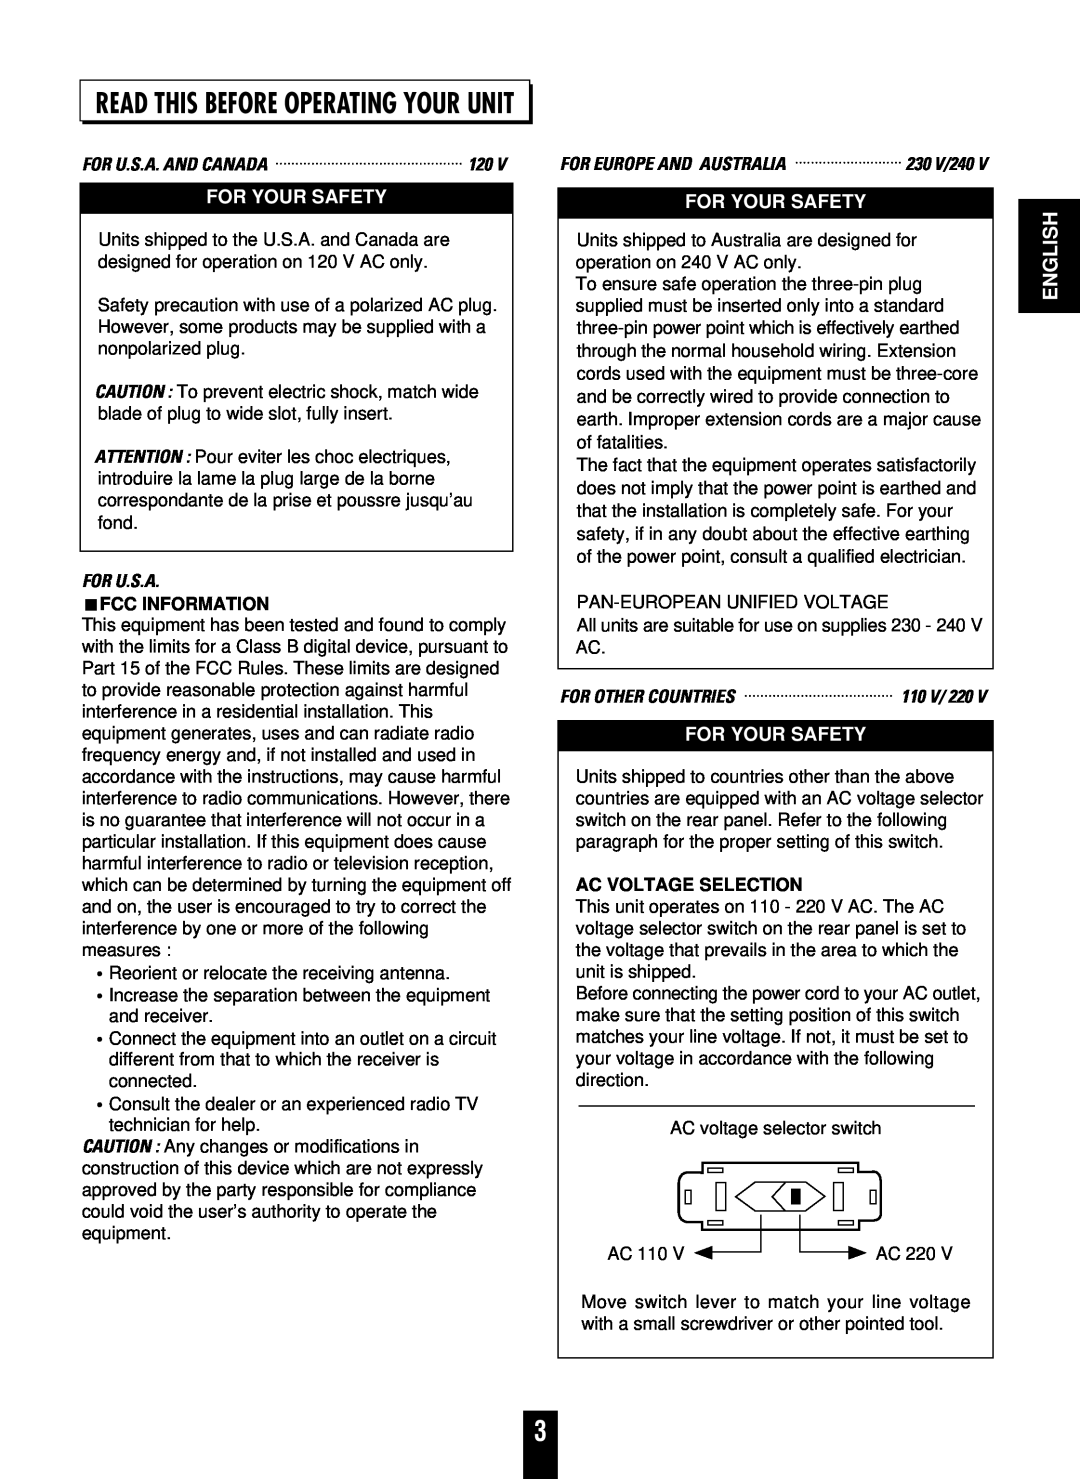 Sherwood CD-5090C/R Read This Before Operating Your Unit, For Your Safety, English, For U.S.A. And Canada, Fcc Information 